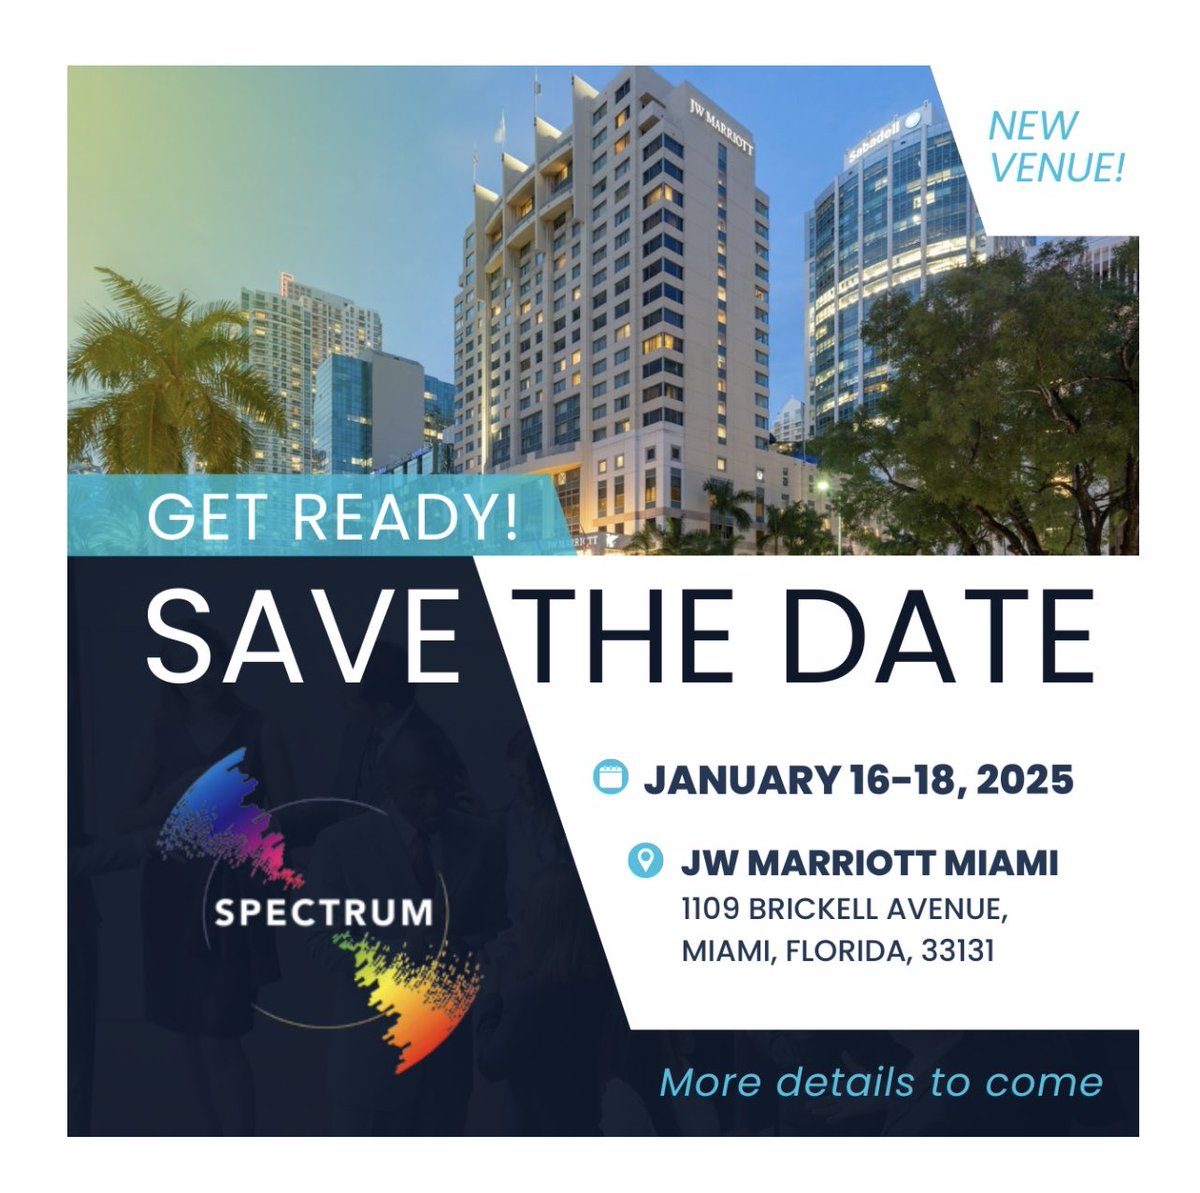 Save the date & join us for another exciting edition of @MiamiSpectrum multidisciplinary #oncology @ the JW Marriott Miami Jan16-18, 2025!! @SIRspecialists @SIRRFS @SIR_ECS @ISVIRIndia @BHCancerCare #cancer #ablation #baptisthealth @CAIRweb @BSIR_News